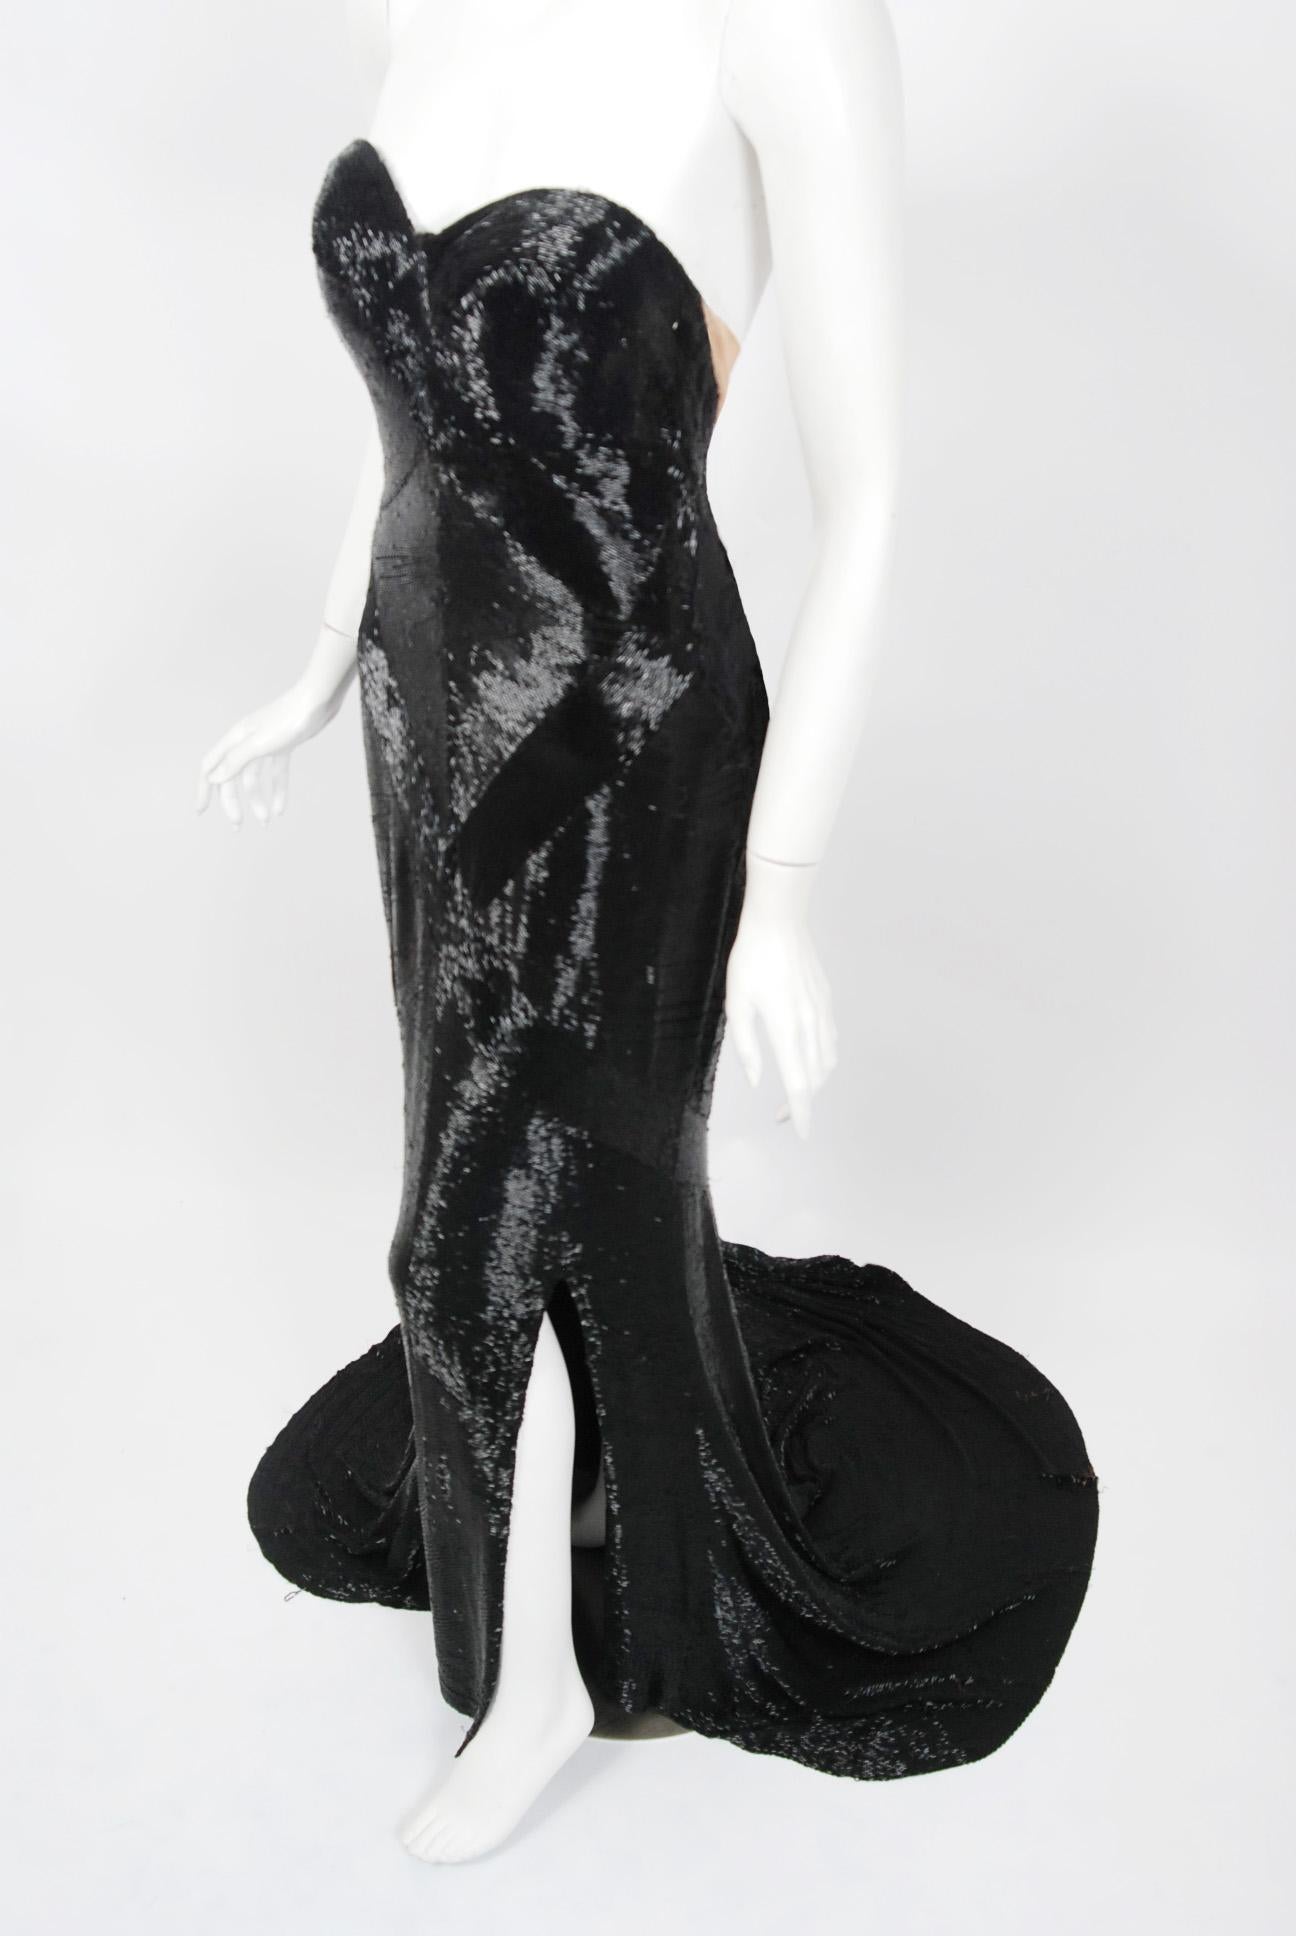 A breathtaking Gilbert Adrian designed gown for Lana Turner's performance in the 1943 MGM production of Slightly Dangerous. He created the signature looks for the great Hollywood divas such as Garbo, Shearer, Crawford, Garland, and Harlow. Adrian